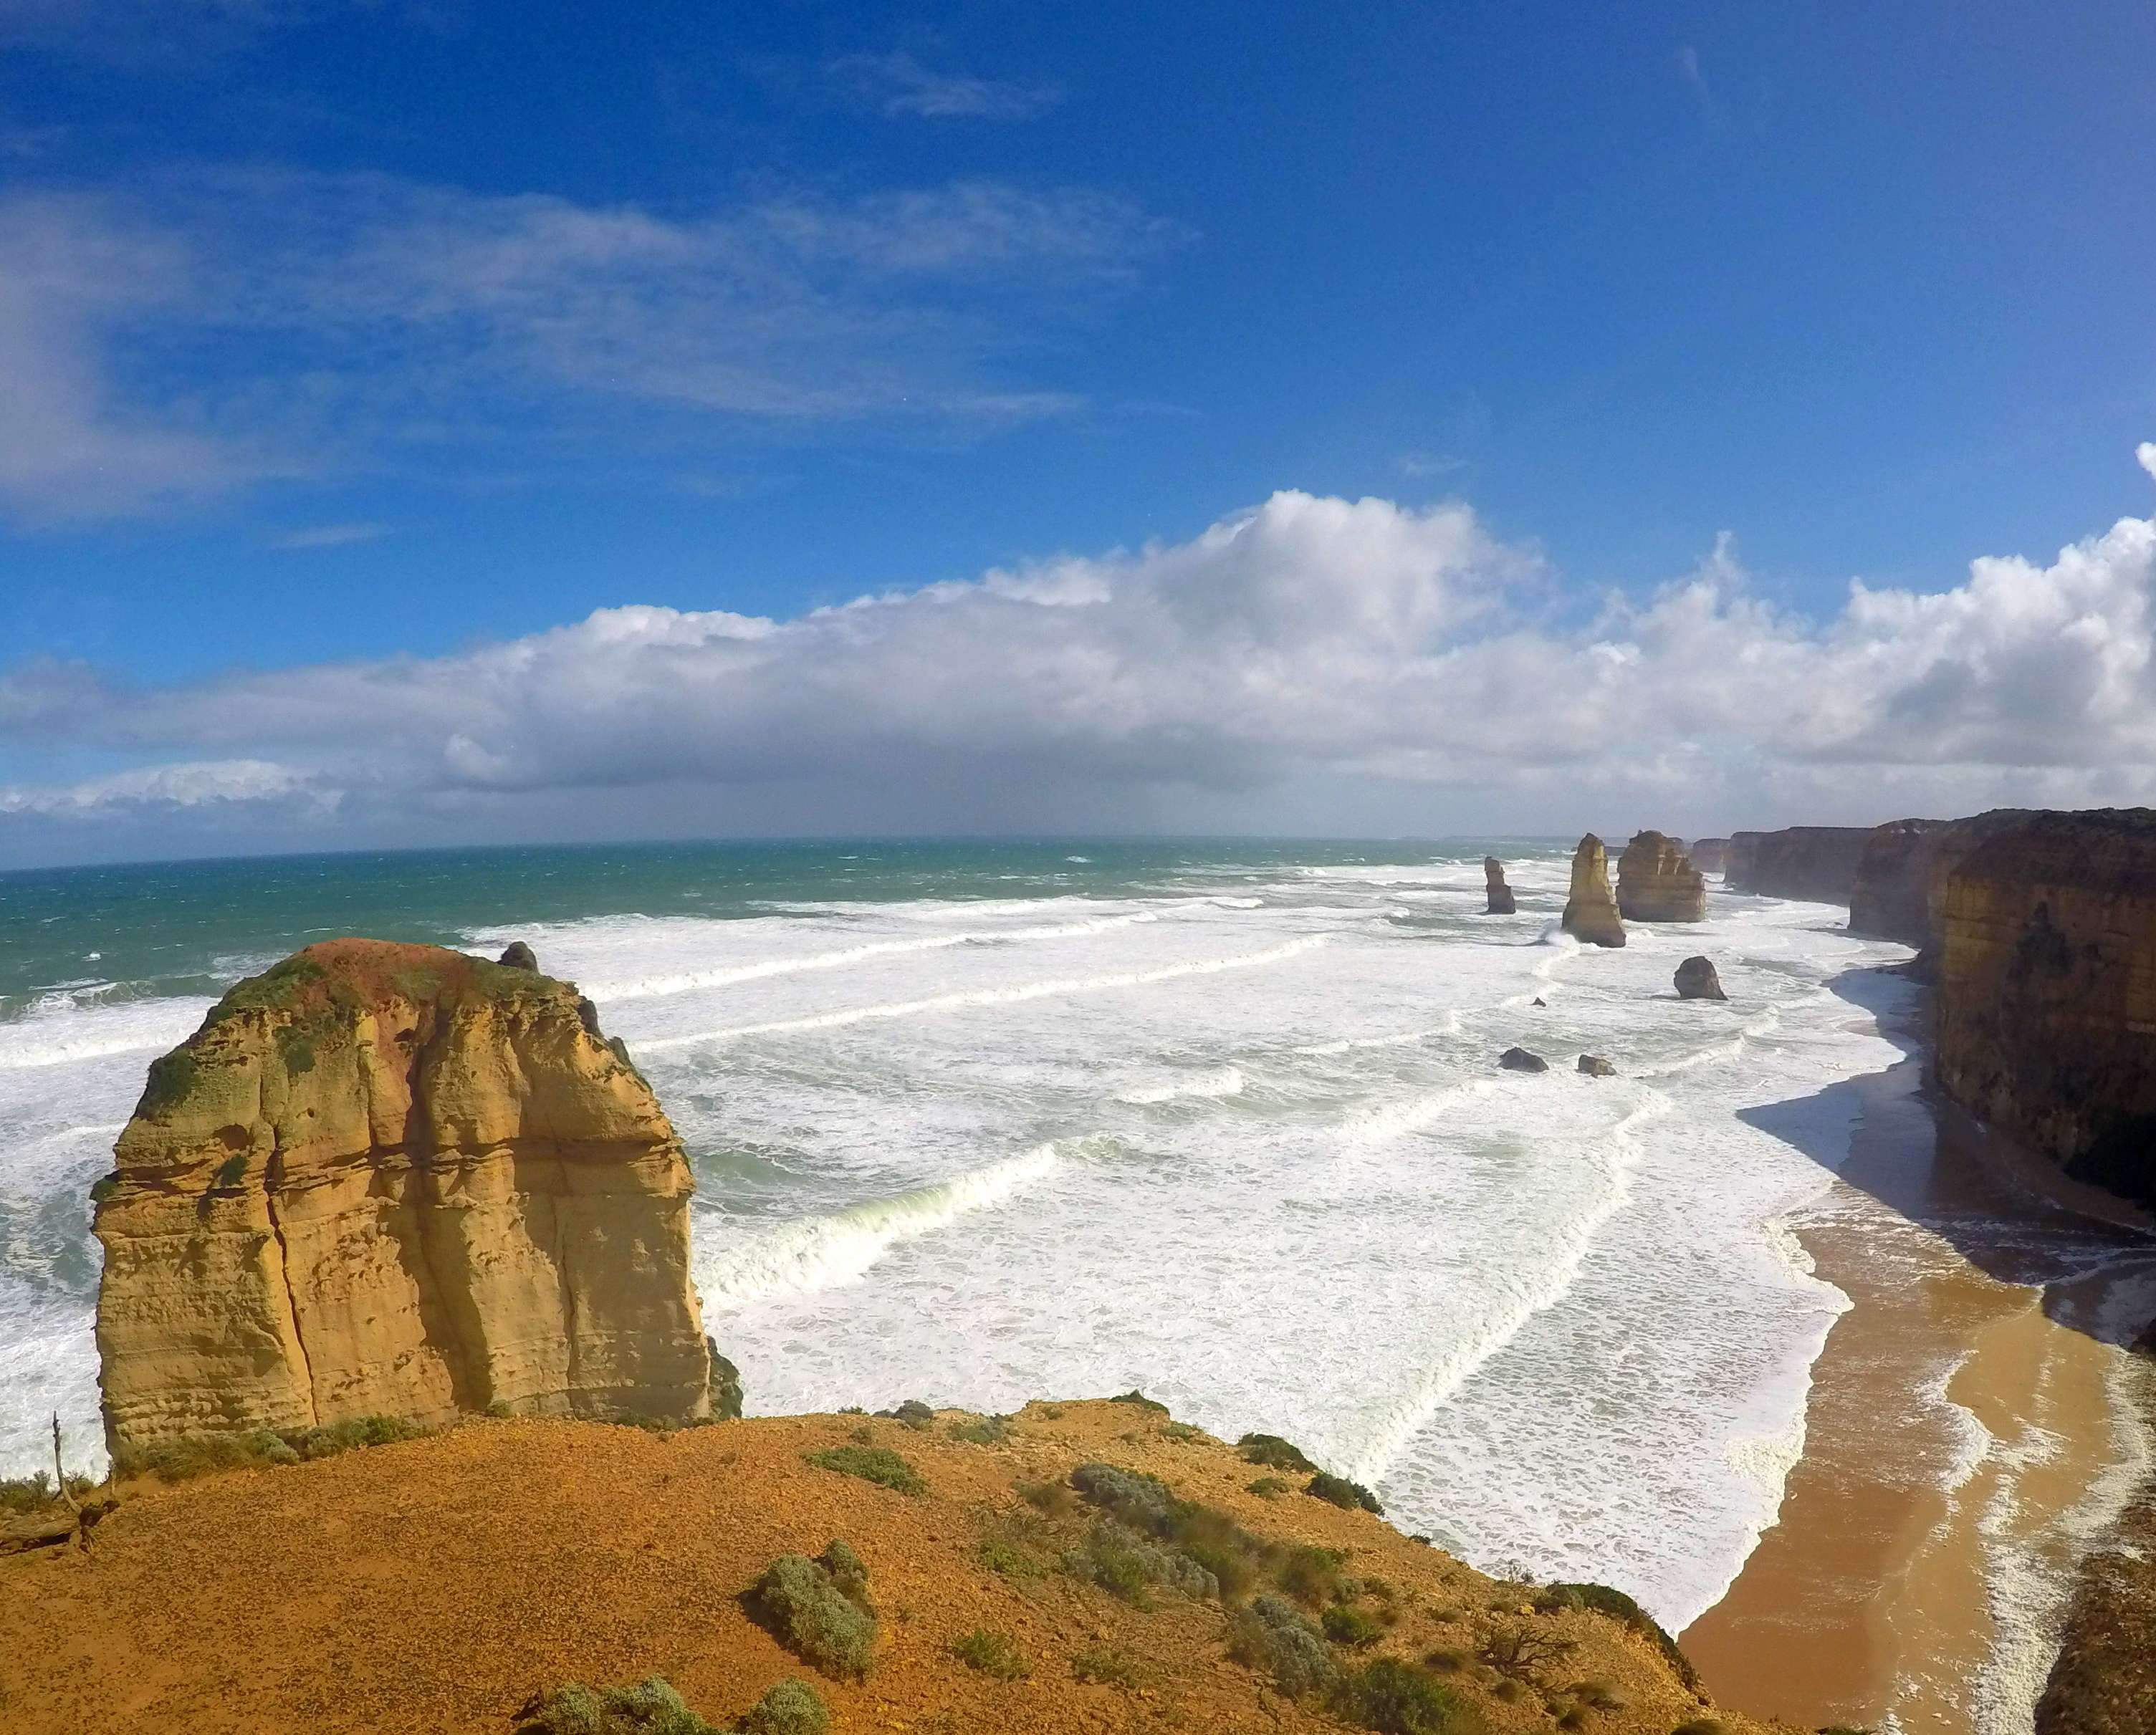 Day trip to Great Ocean Road